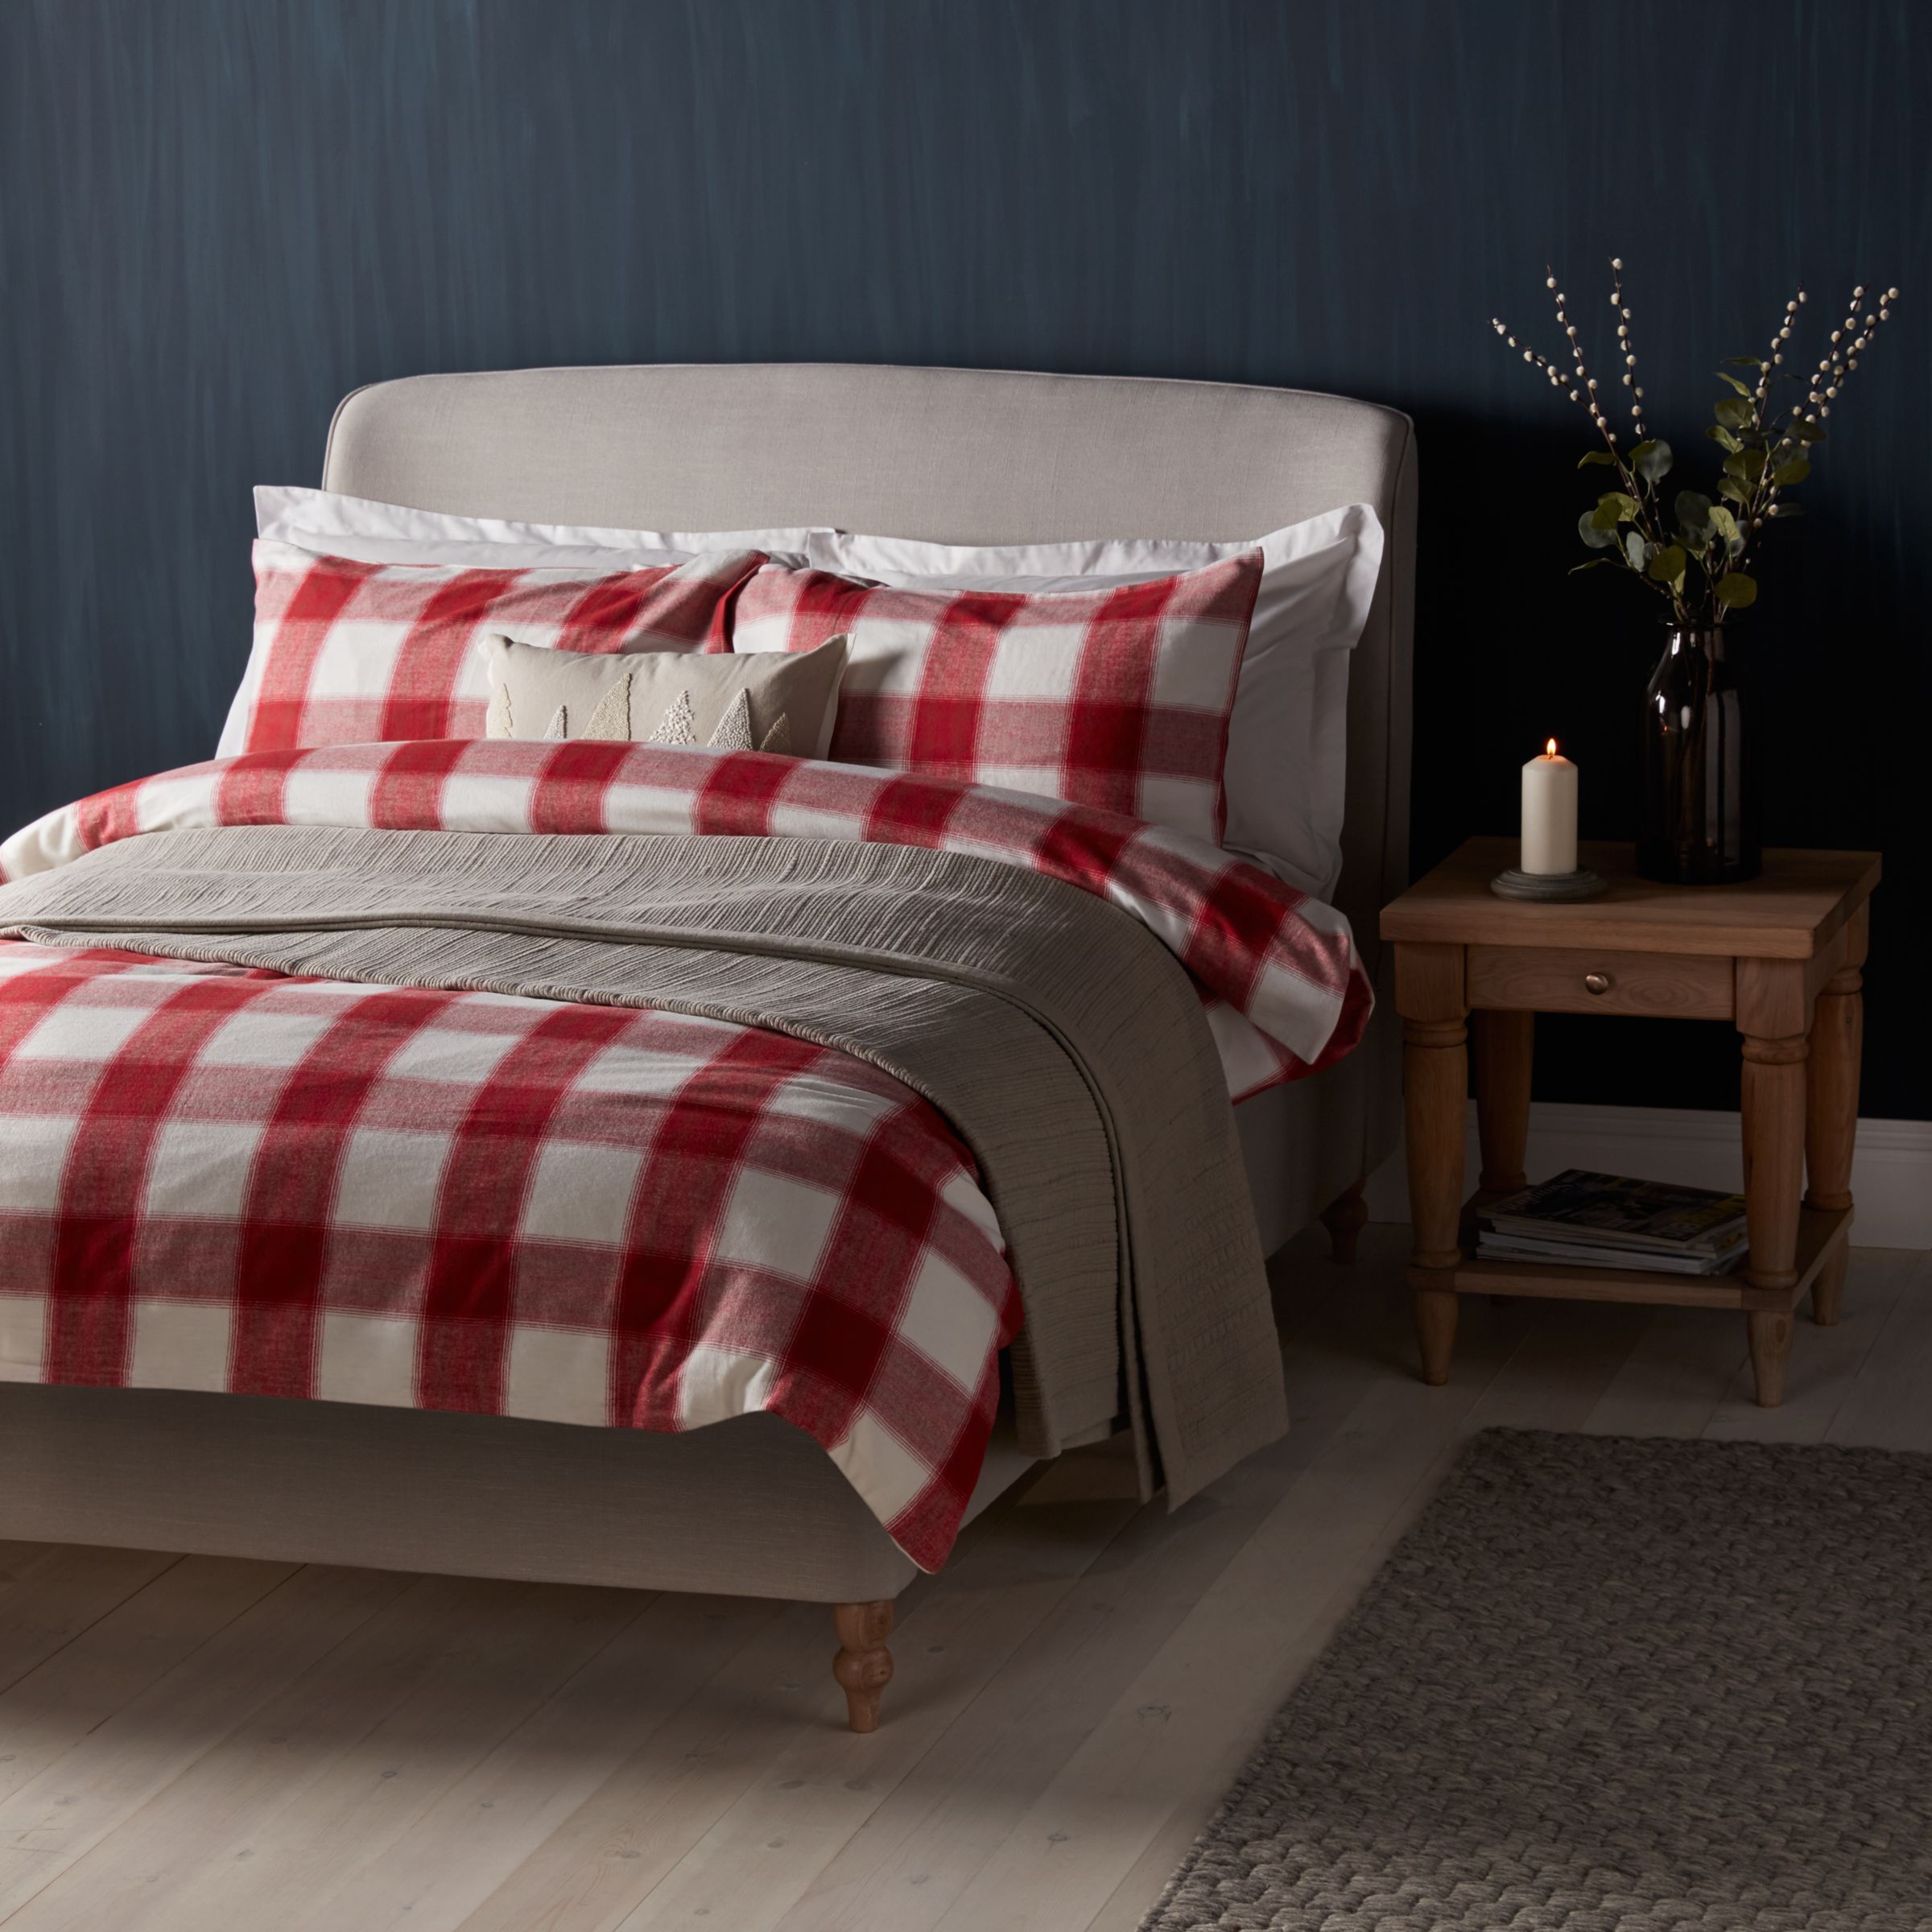 John Lewis Partners Warm And Cosy Ombre Check Brushed Cotton